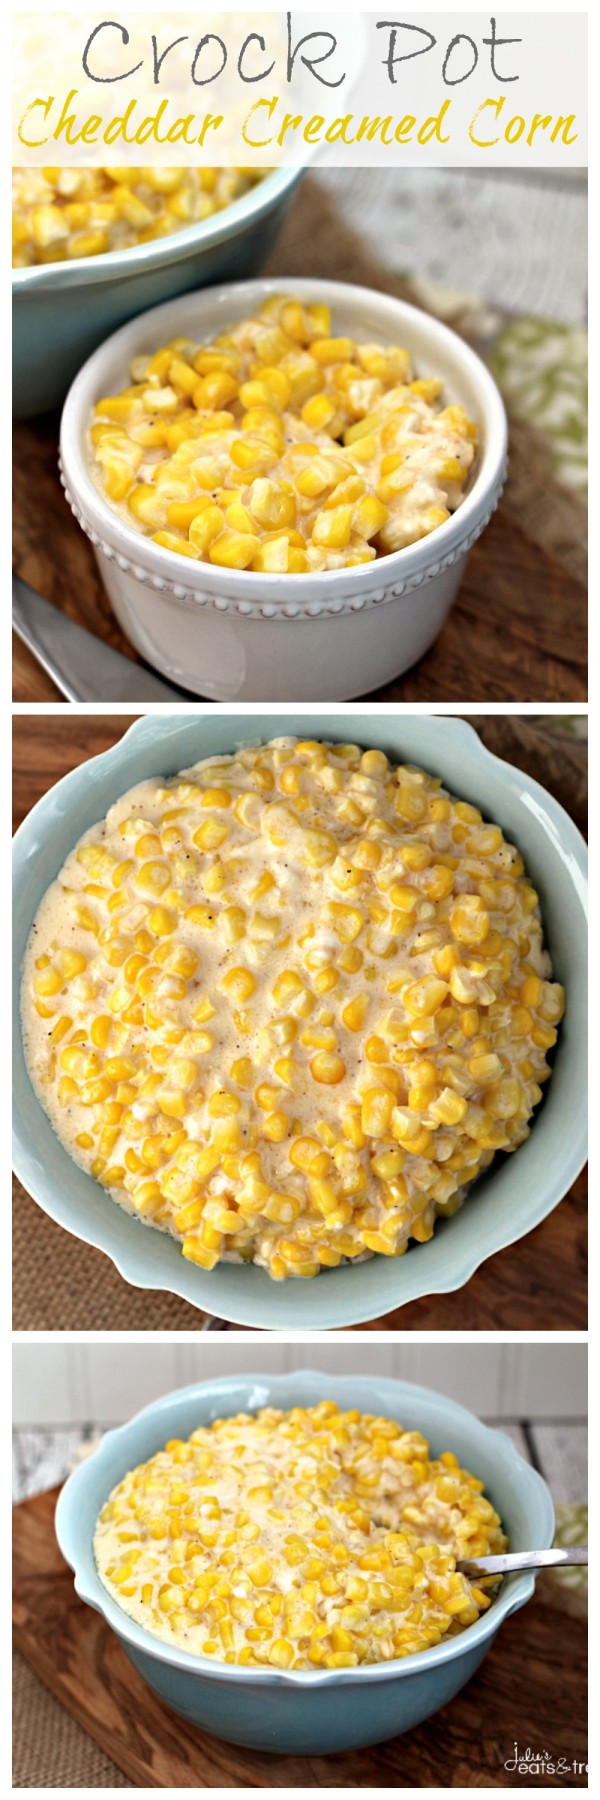 Crock Pot Side Dishes
 Crock Pot Cheddar Creamed Corn The perfect easy side